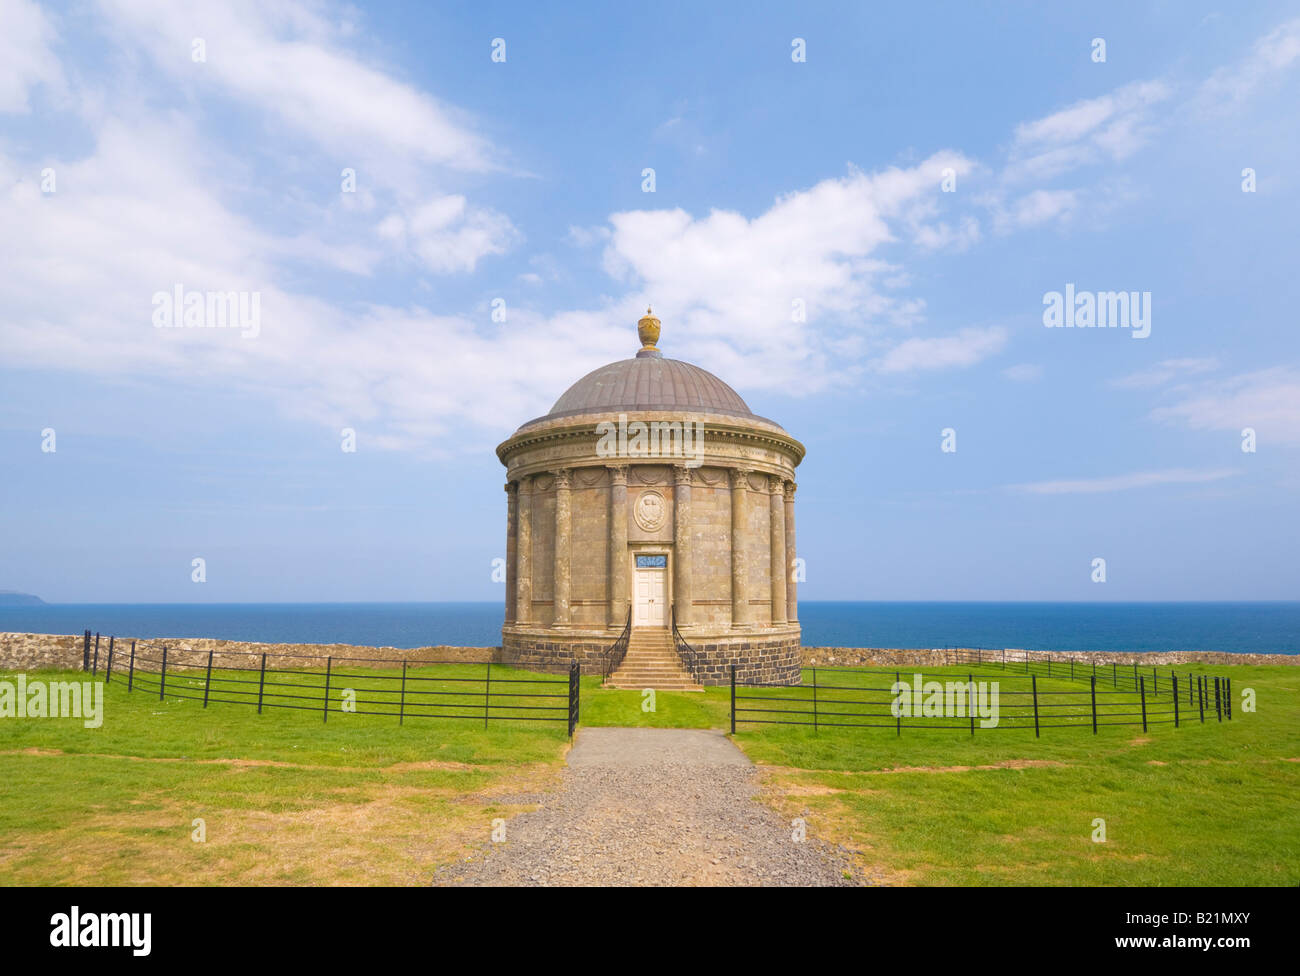 The Mussenden temple perched on a cliff edge is part of the Downhill estate County Londonderry Northern Ireland GB UK EU Europe Stock Photo